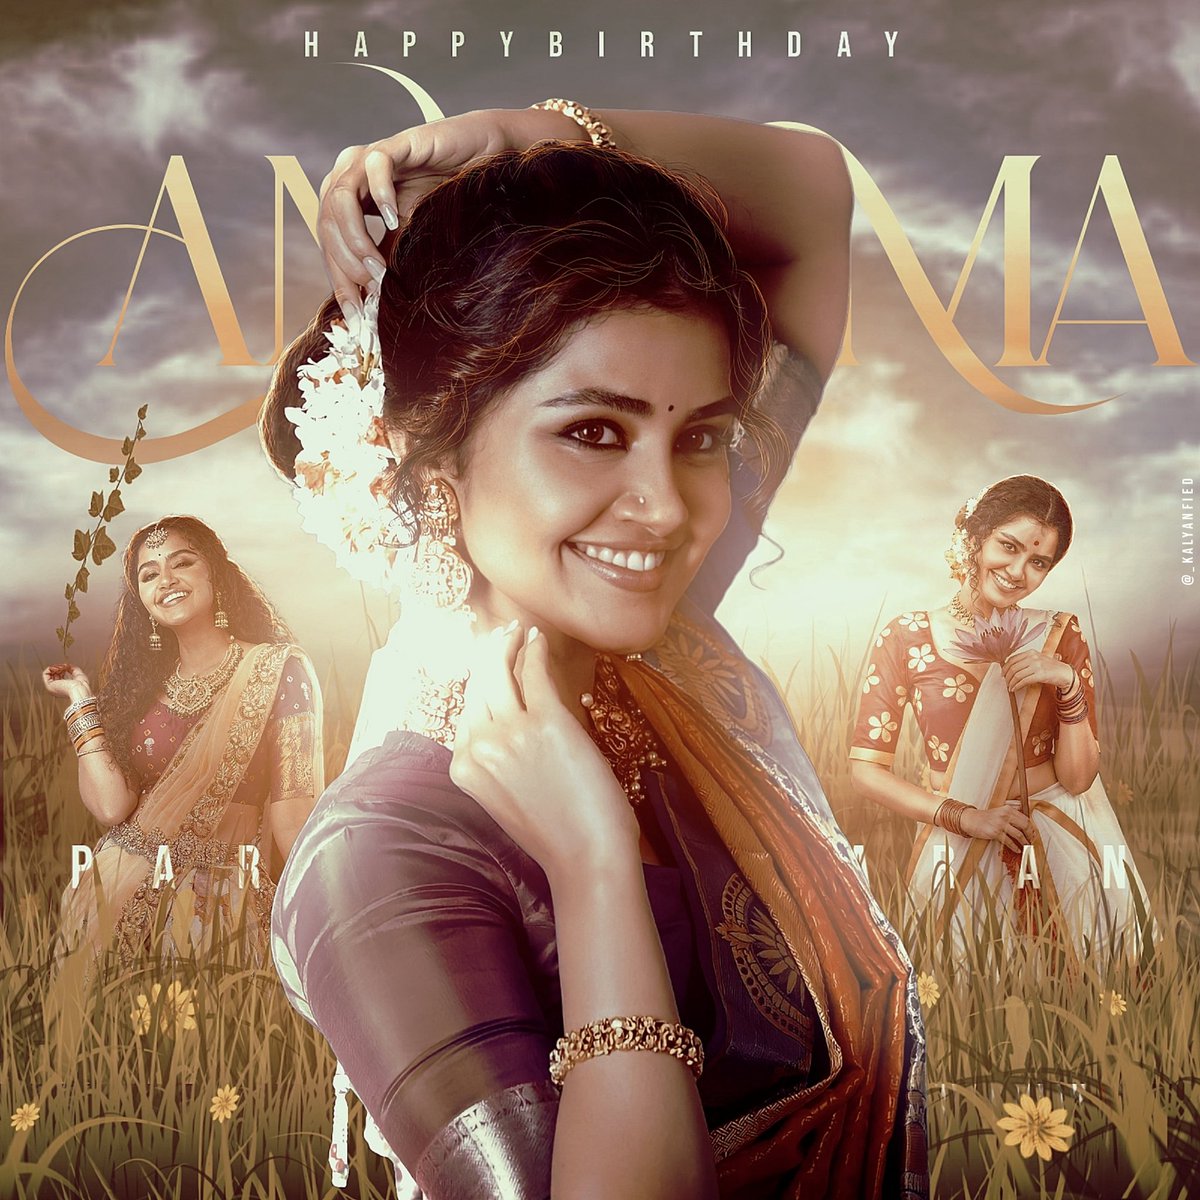 Here Comes The My side CDP Design To Our Sublime Queen @anupamahere ❤️❤️

Hope u all lyk it ❤️
#AnupamaBDayCDP ❤️
#AnupamaParameshwaran ❤️